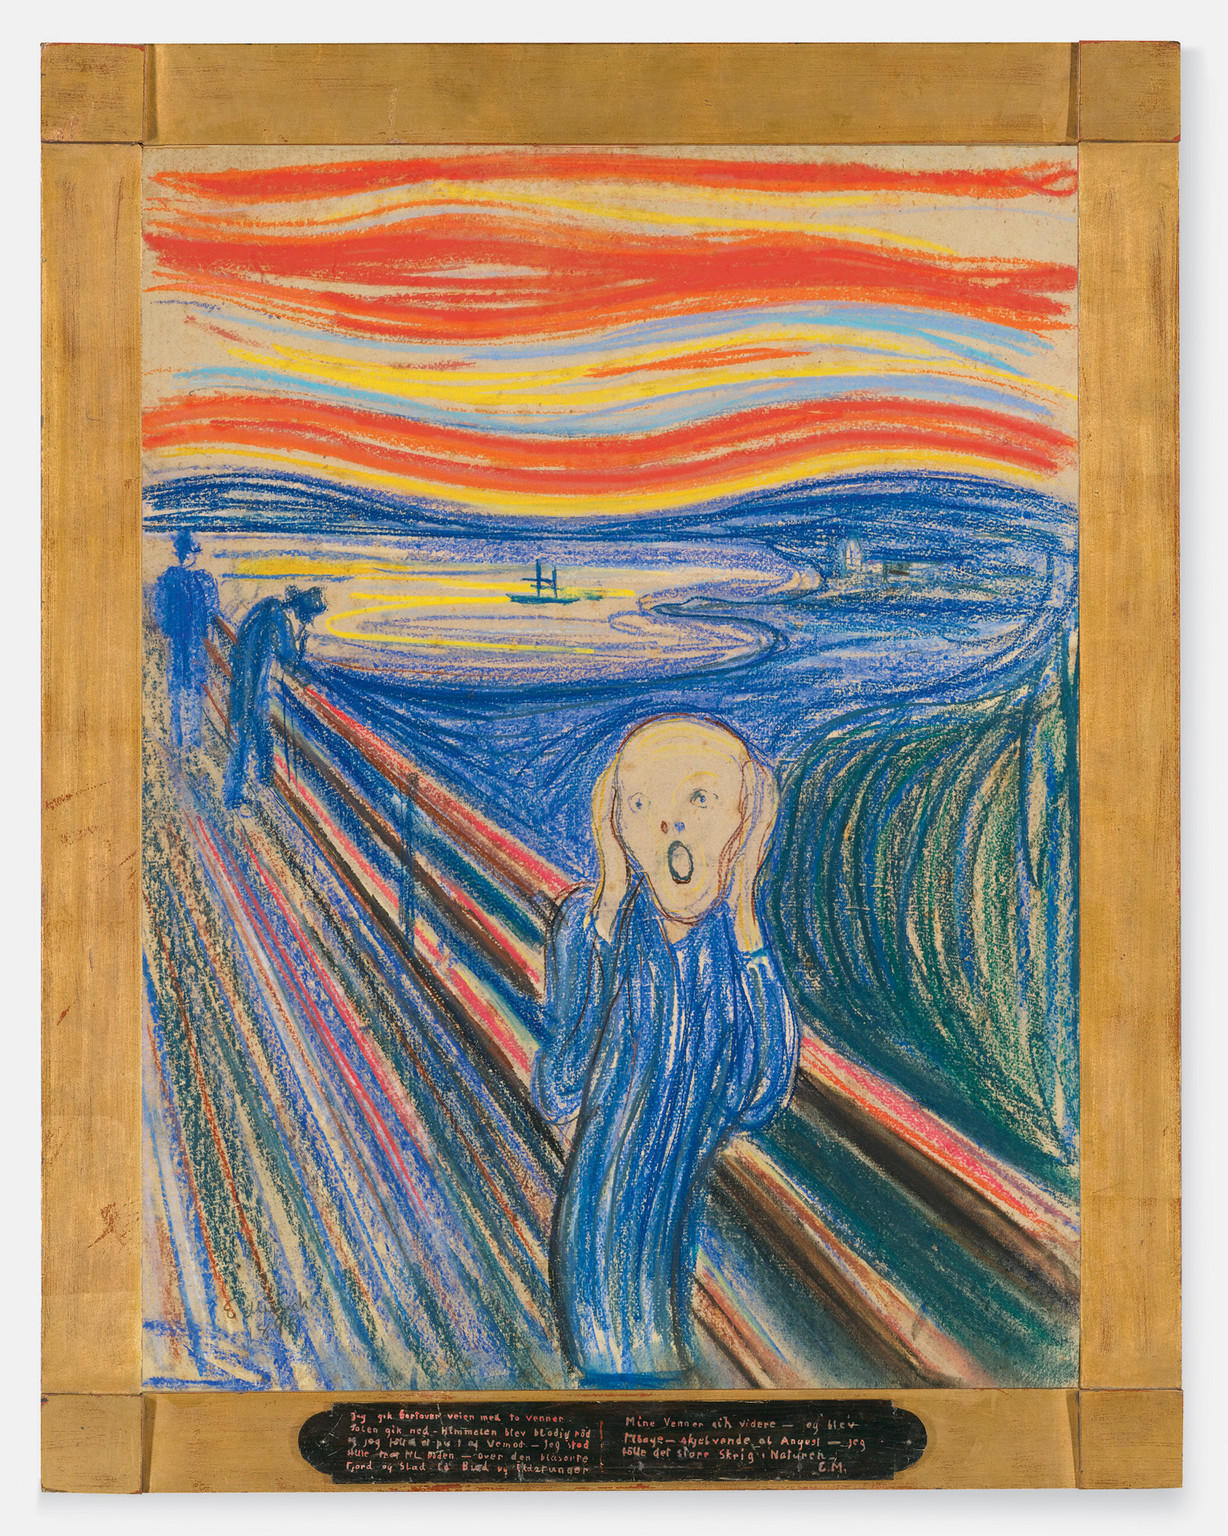 Edvard Munch. The Scream. Pastel on board. 1895. © 2012 The Munch Museum/The Munch-Ellingsen Group/Artists Rights Society (ARS), New York